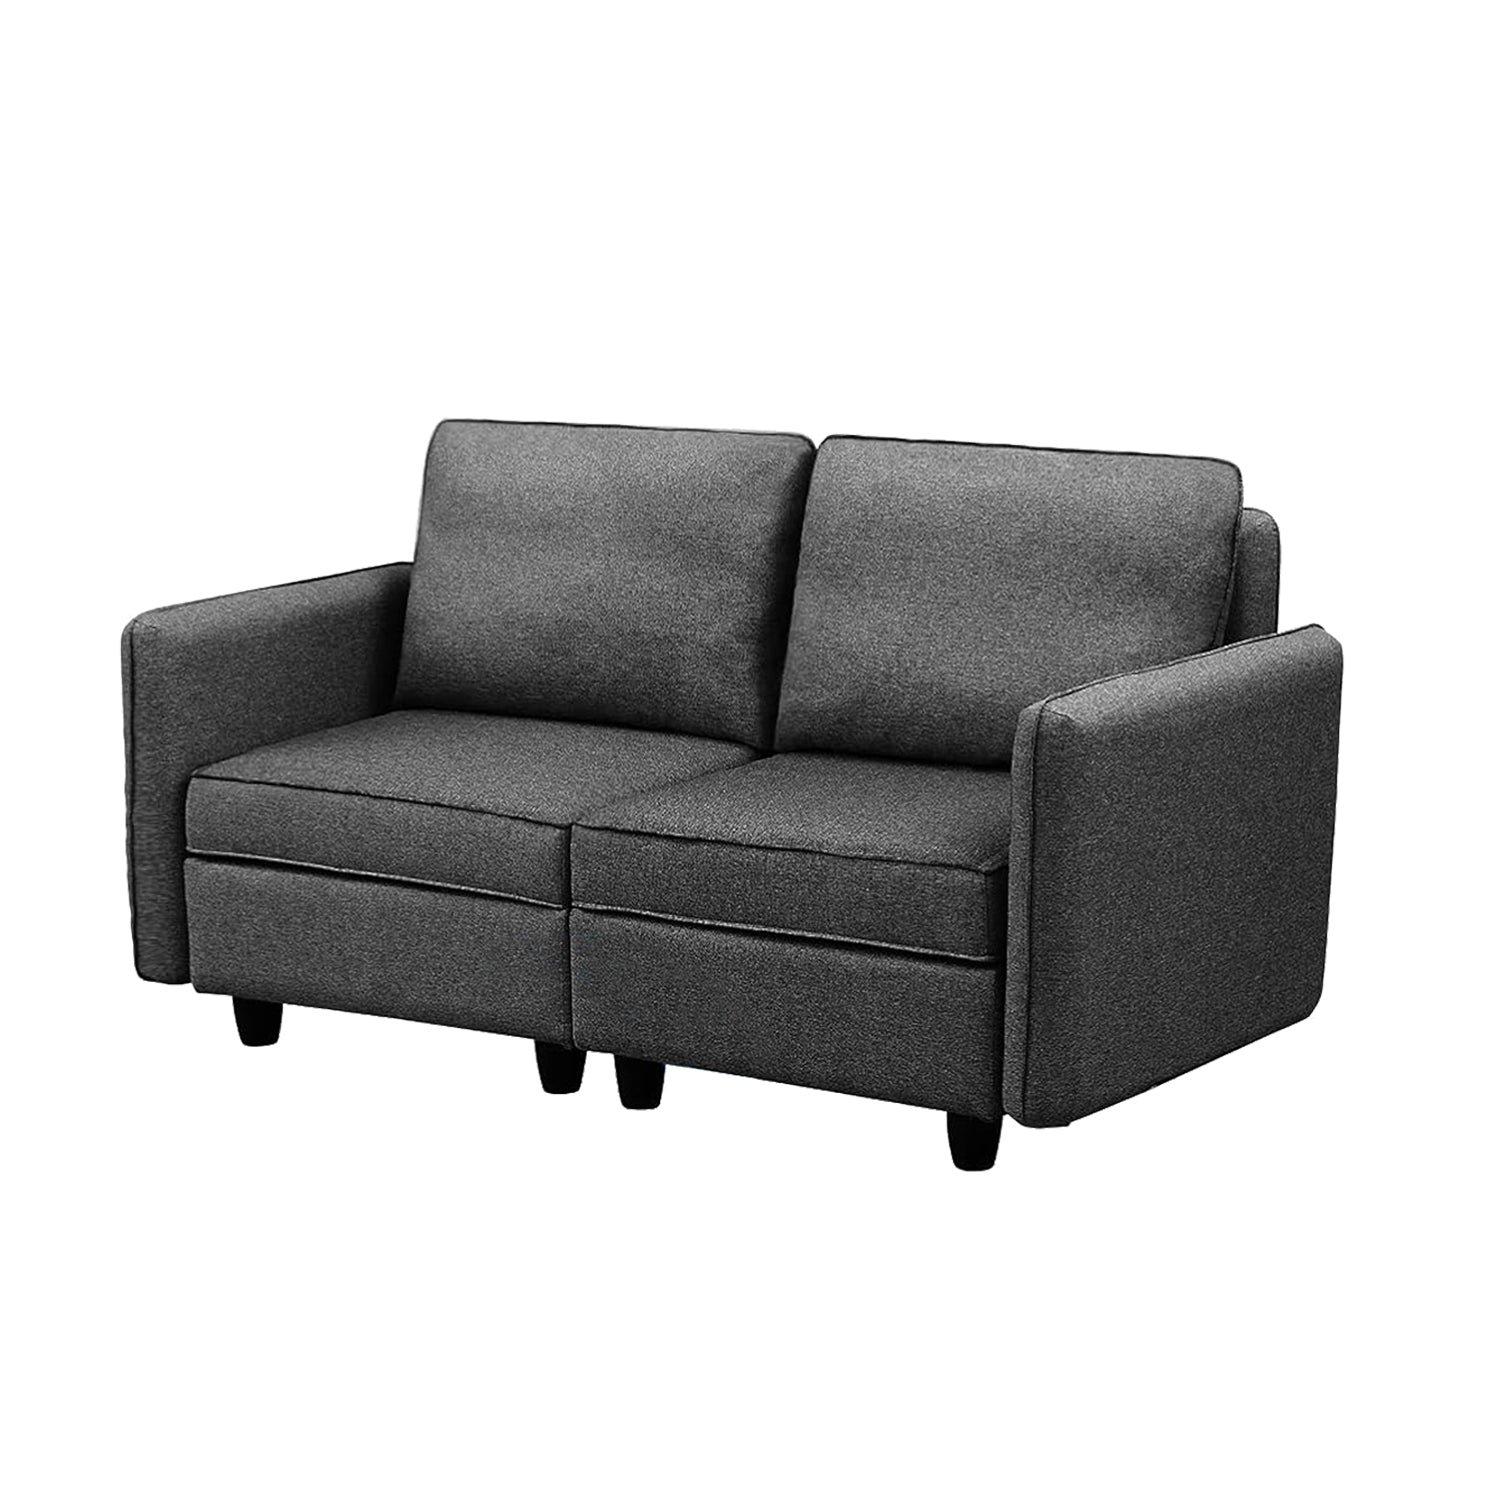 78" Ainfox 2-Seat Linen Upholstered Sofa w/ Storage (Various Colors) $200 + Free Shipping